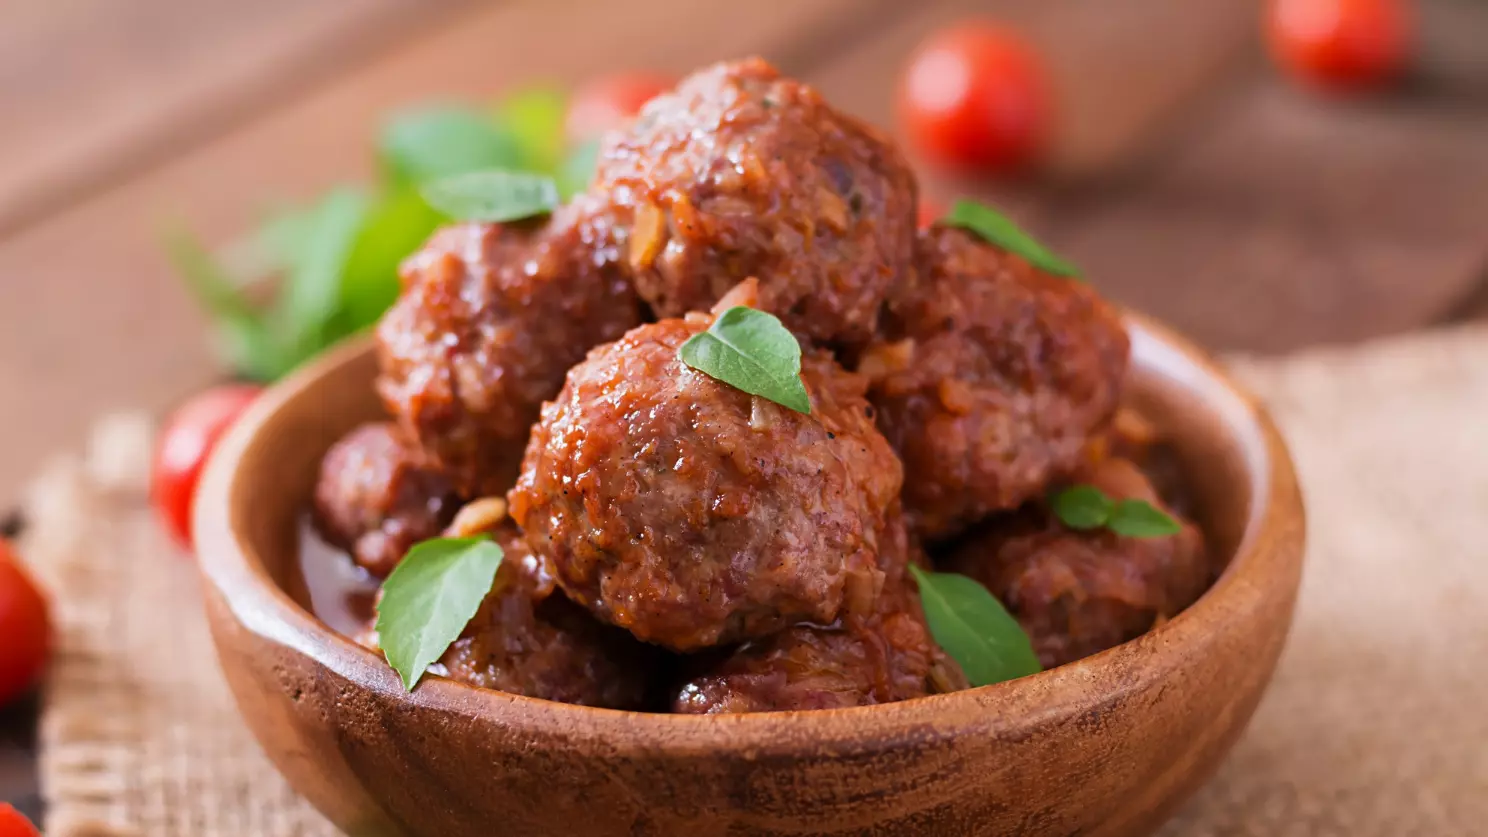 How long to bake meatballs? Guide